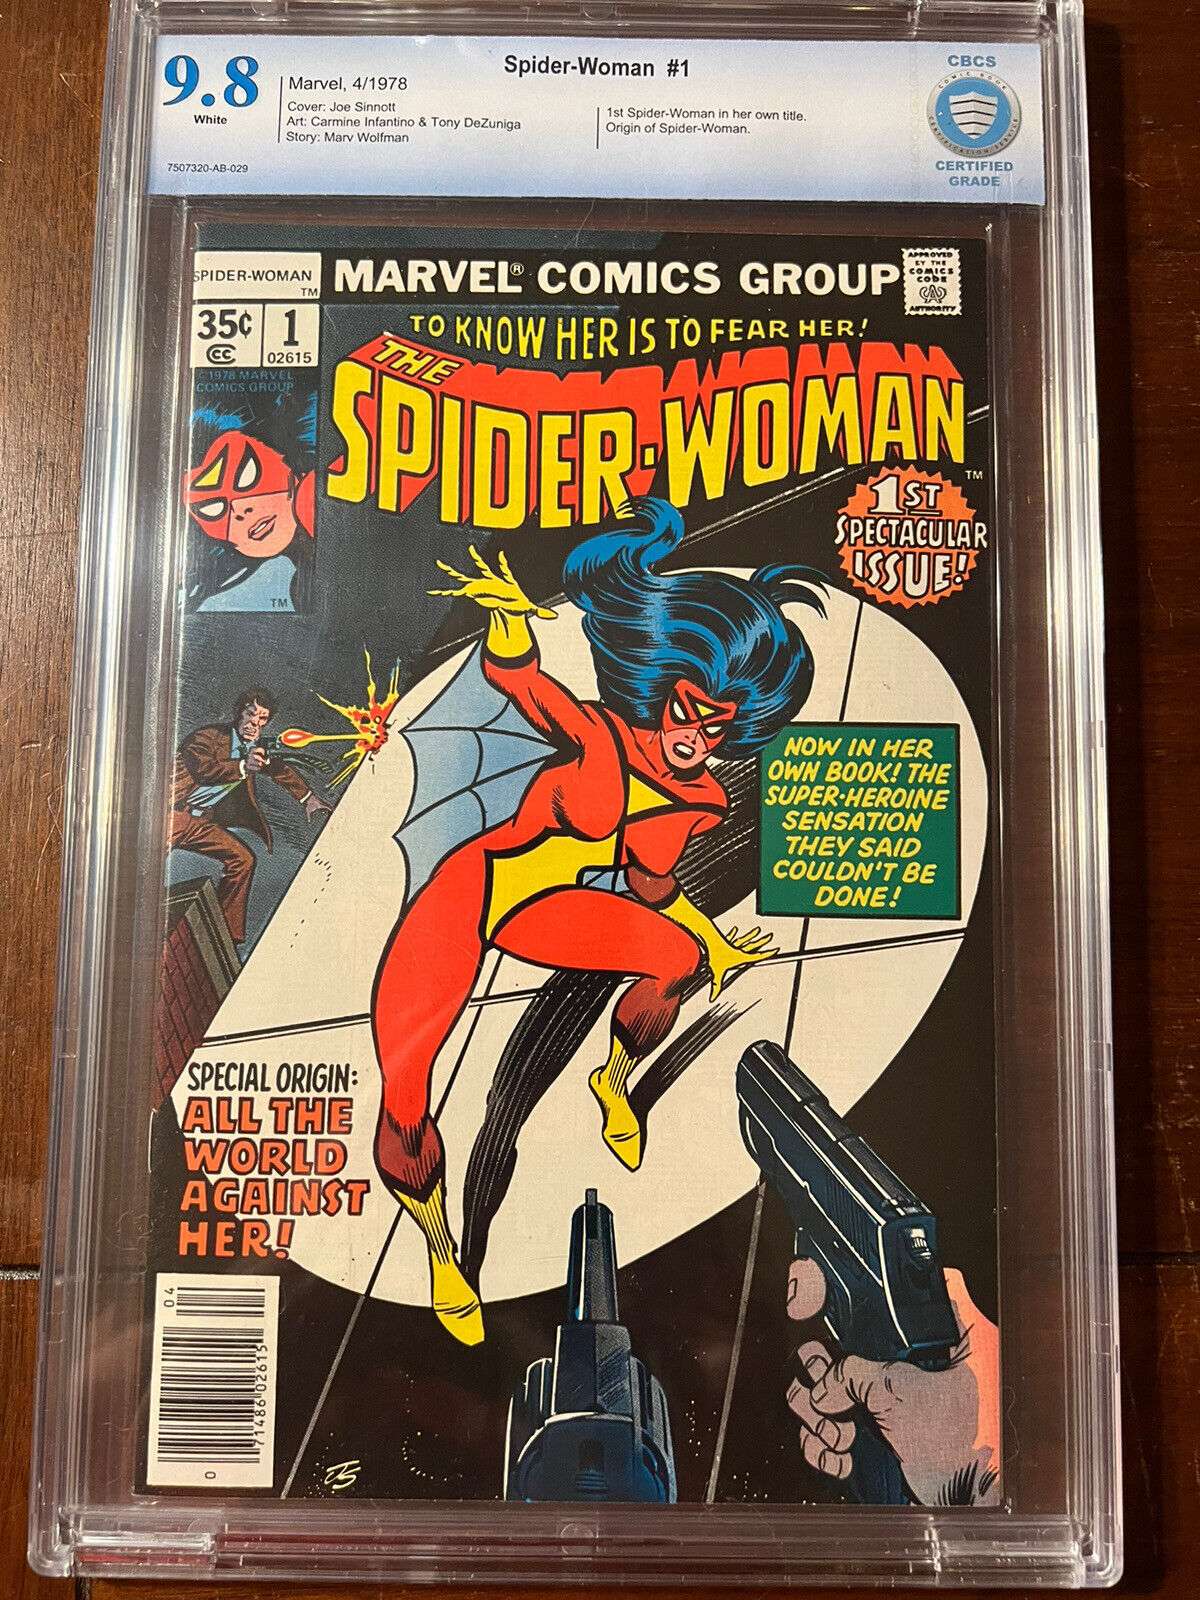 SPIDER-WOMAN #1 4/78 CBCS 9.8 WHITE PAGES ICONIC COVER- EXCELLENT HIGH GRADE